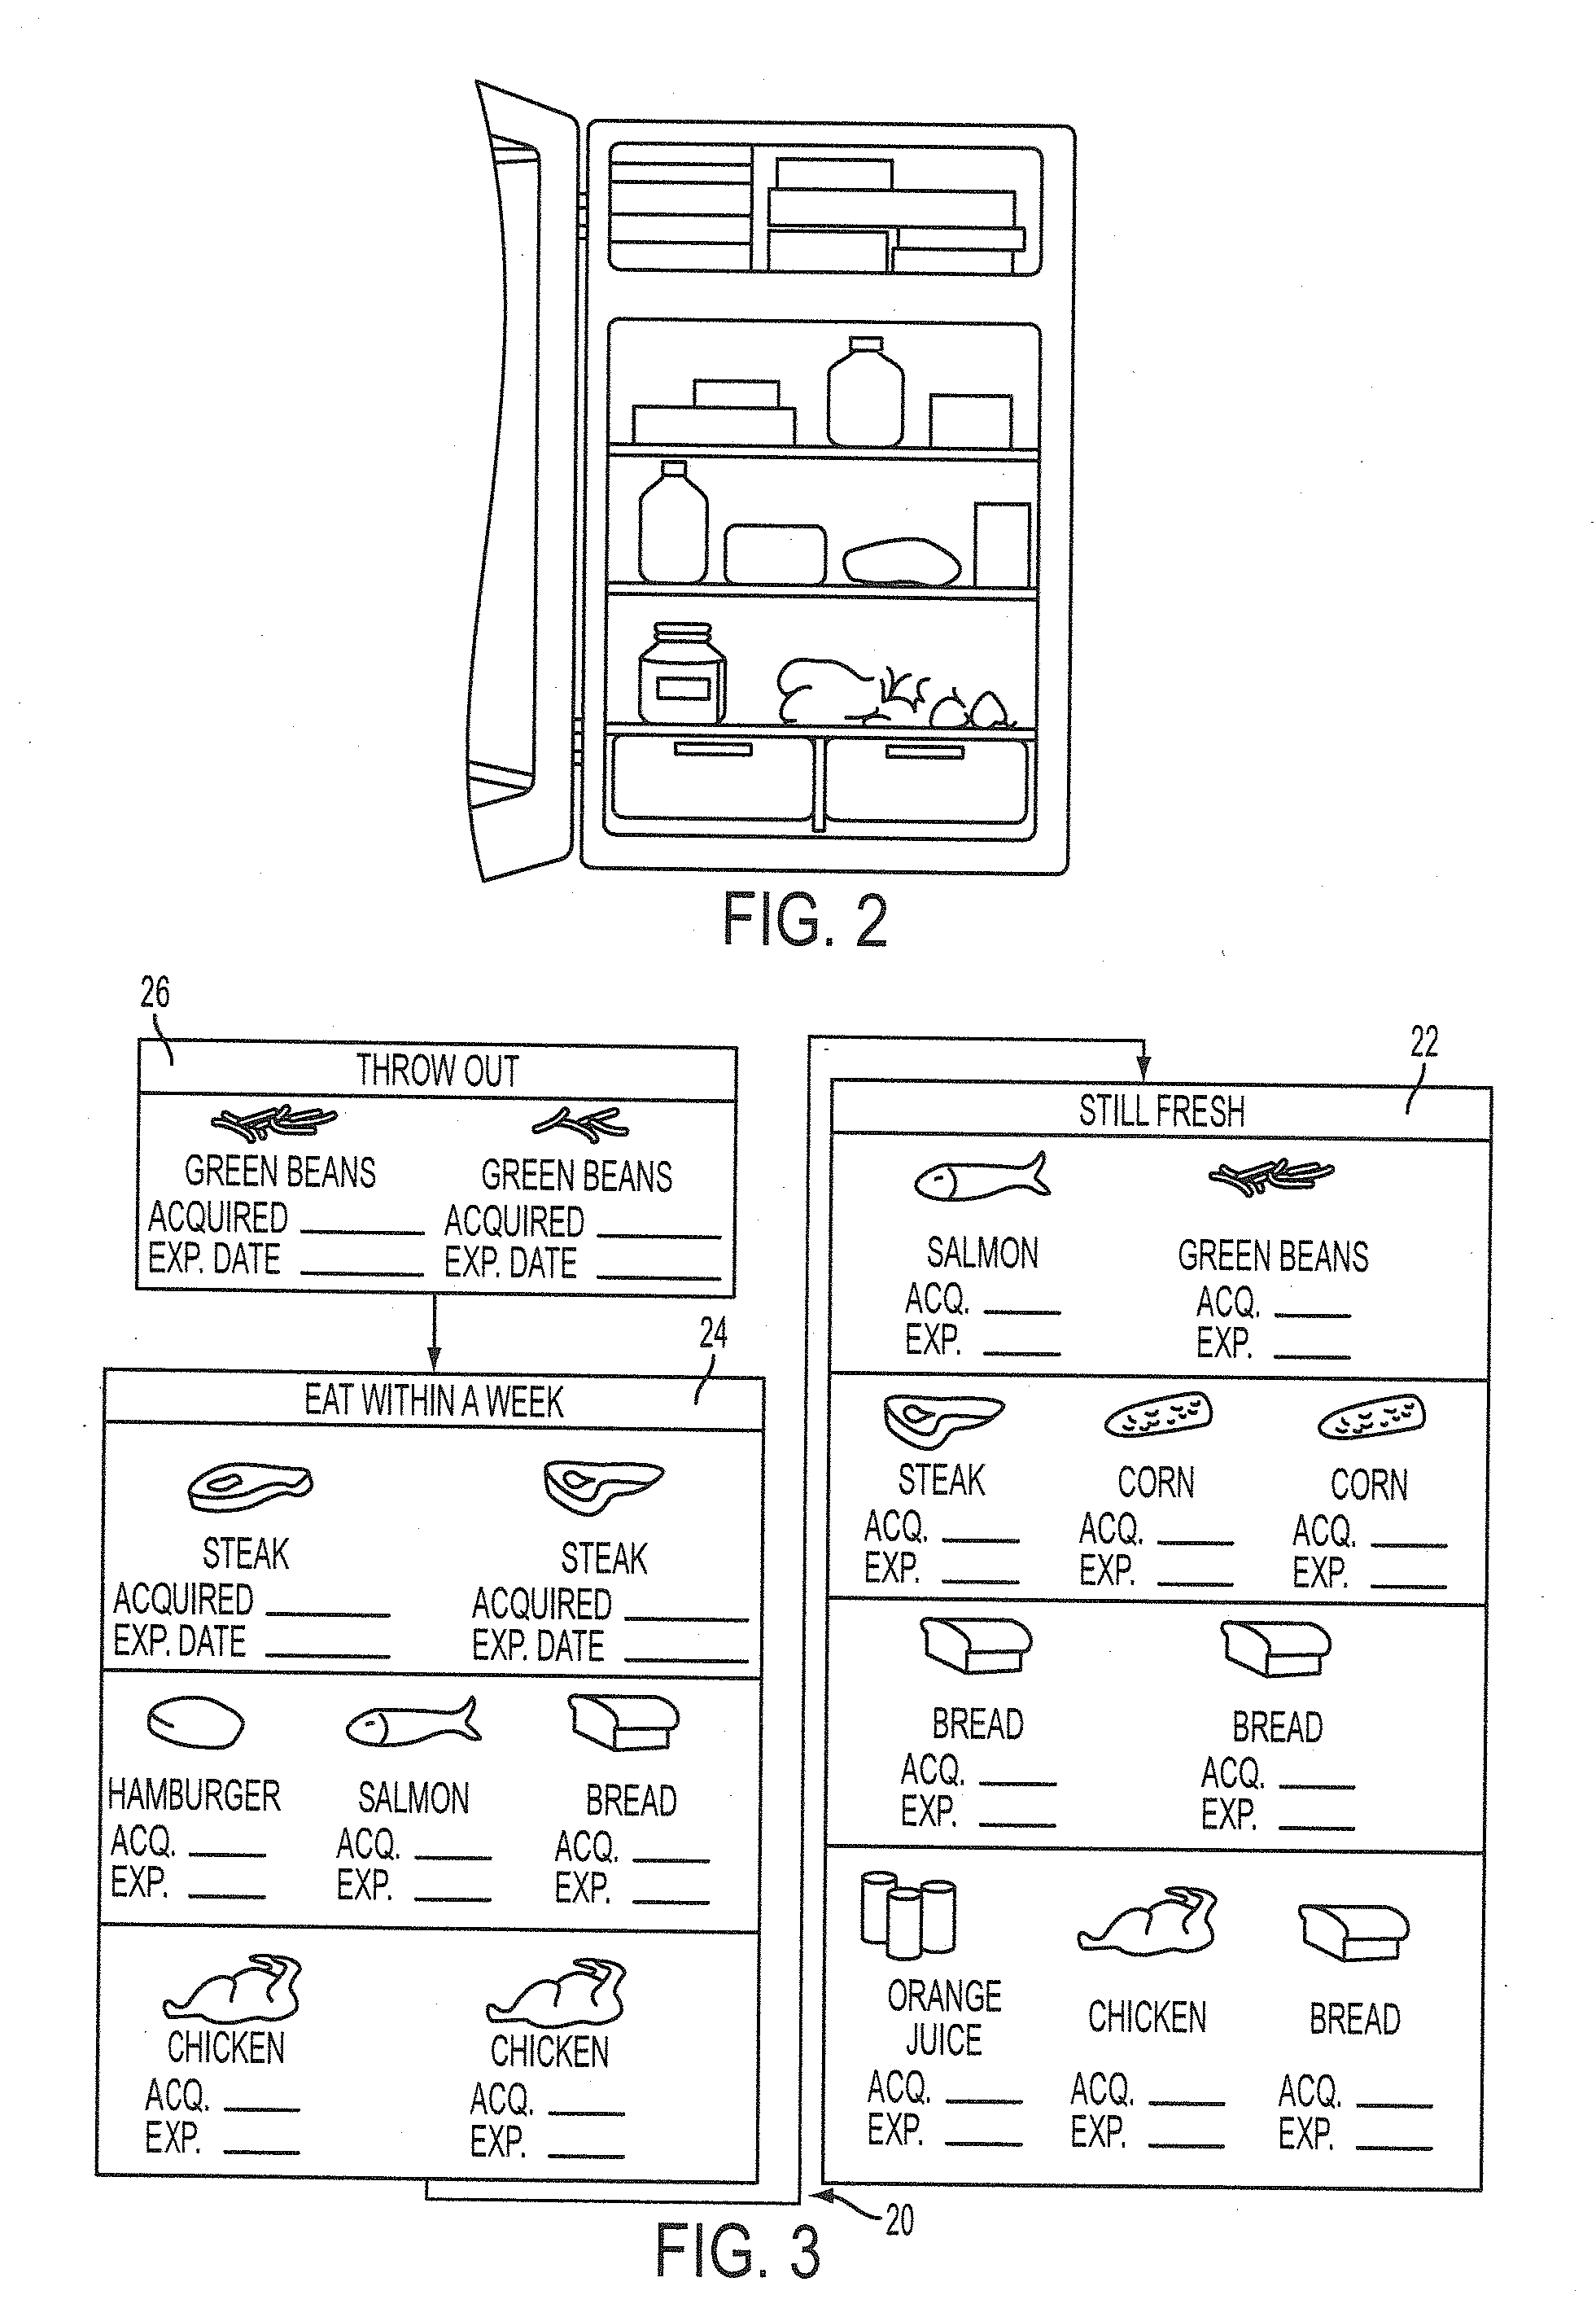 Method of managing household product inventory